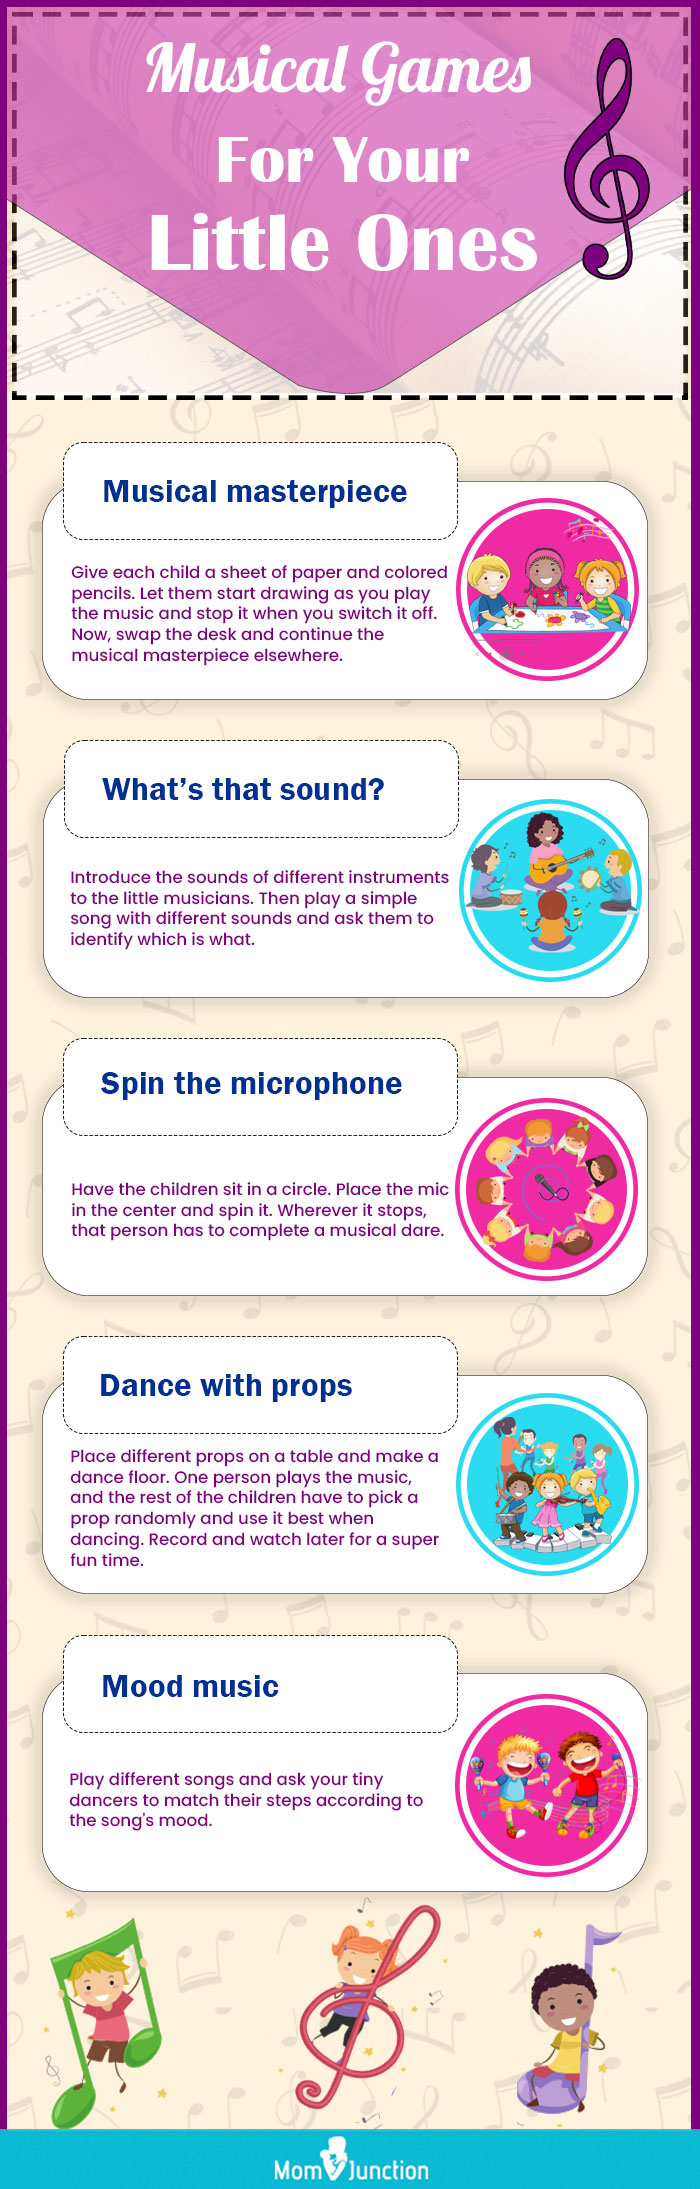 Have some fun with Mom and play freeze dance! Show her your love